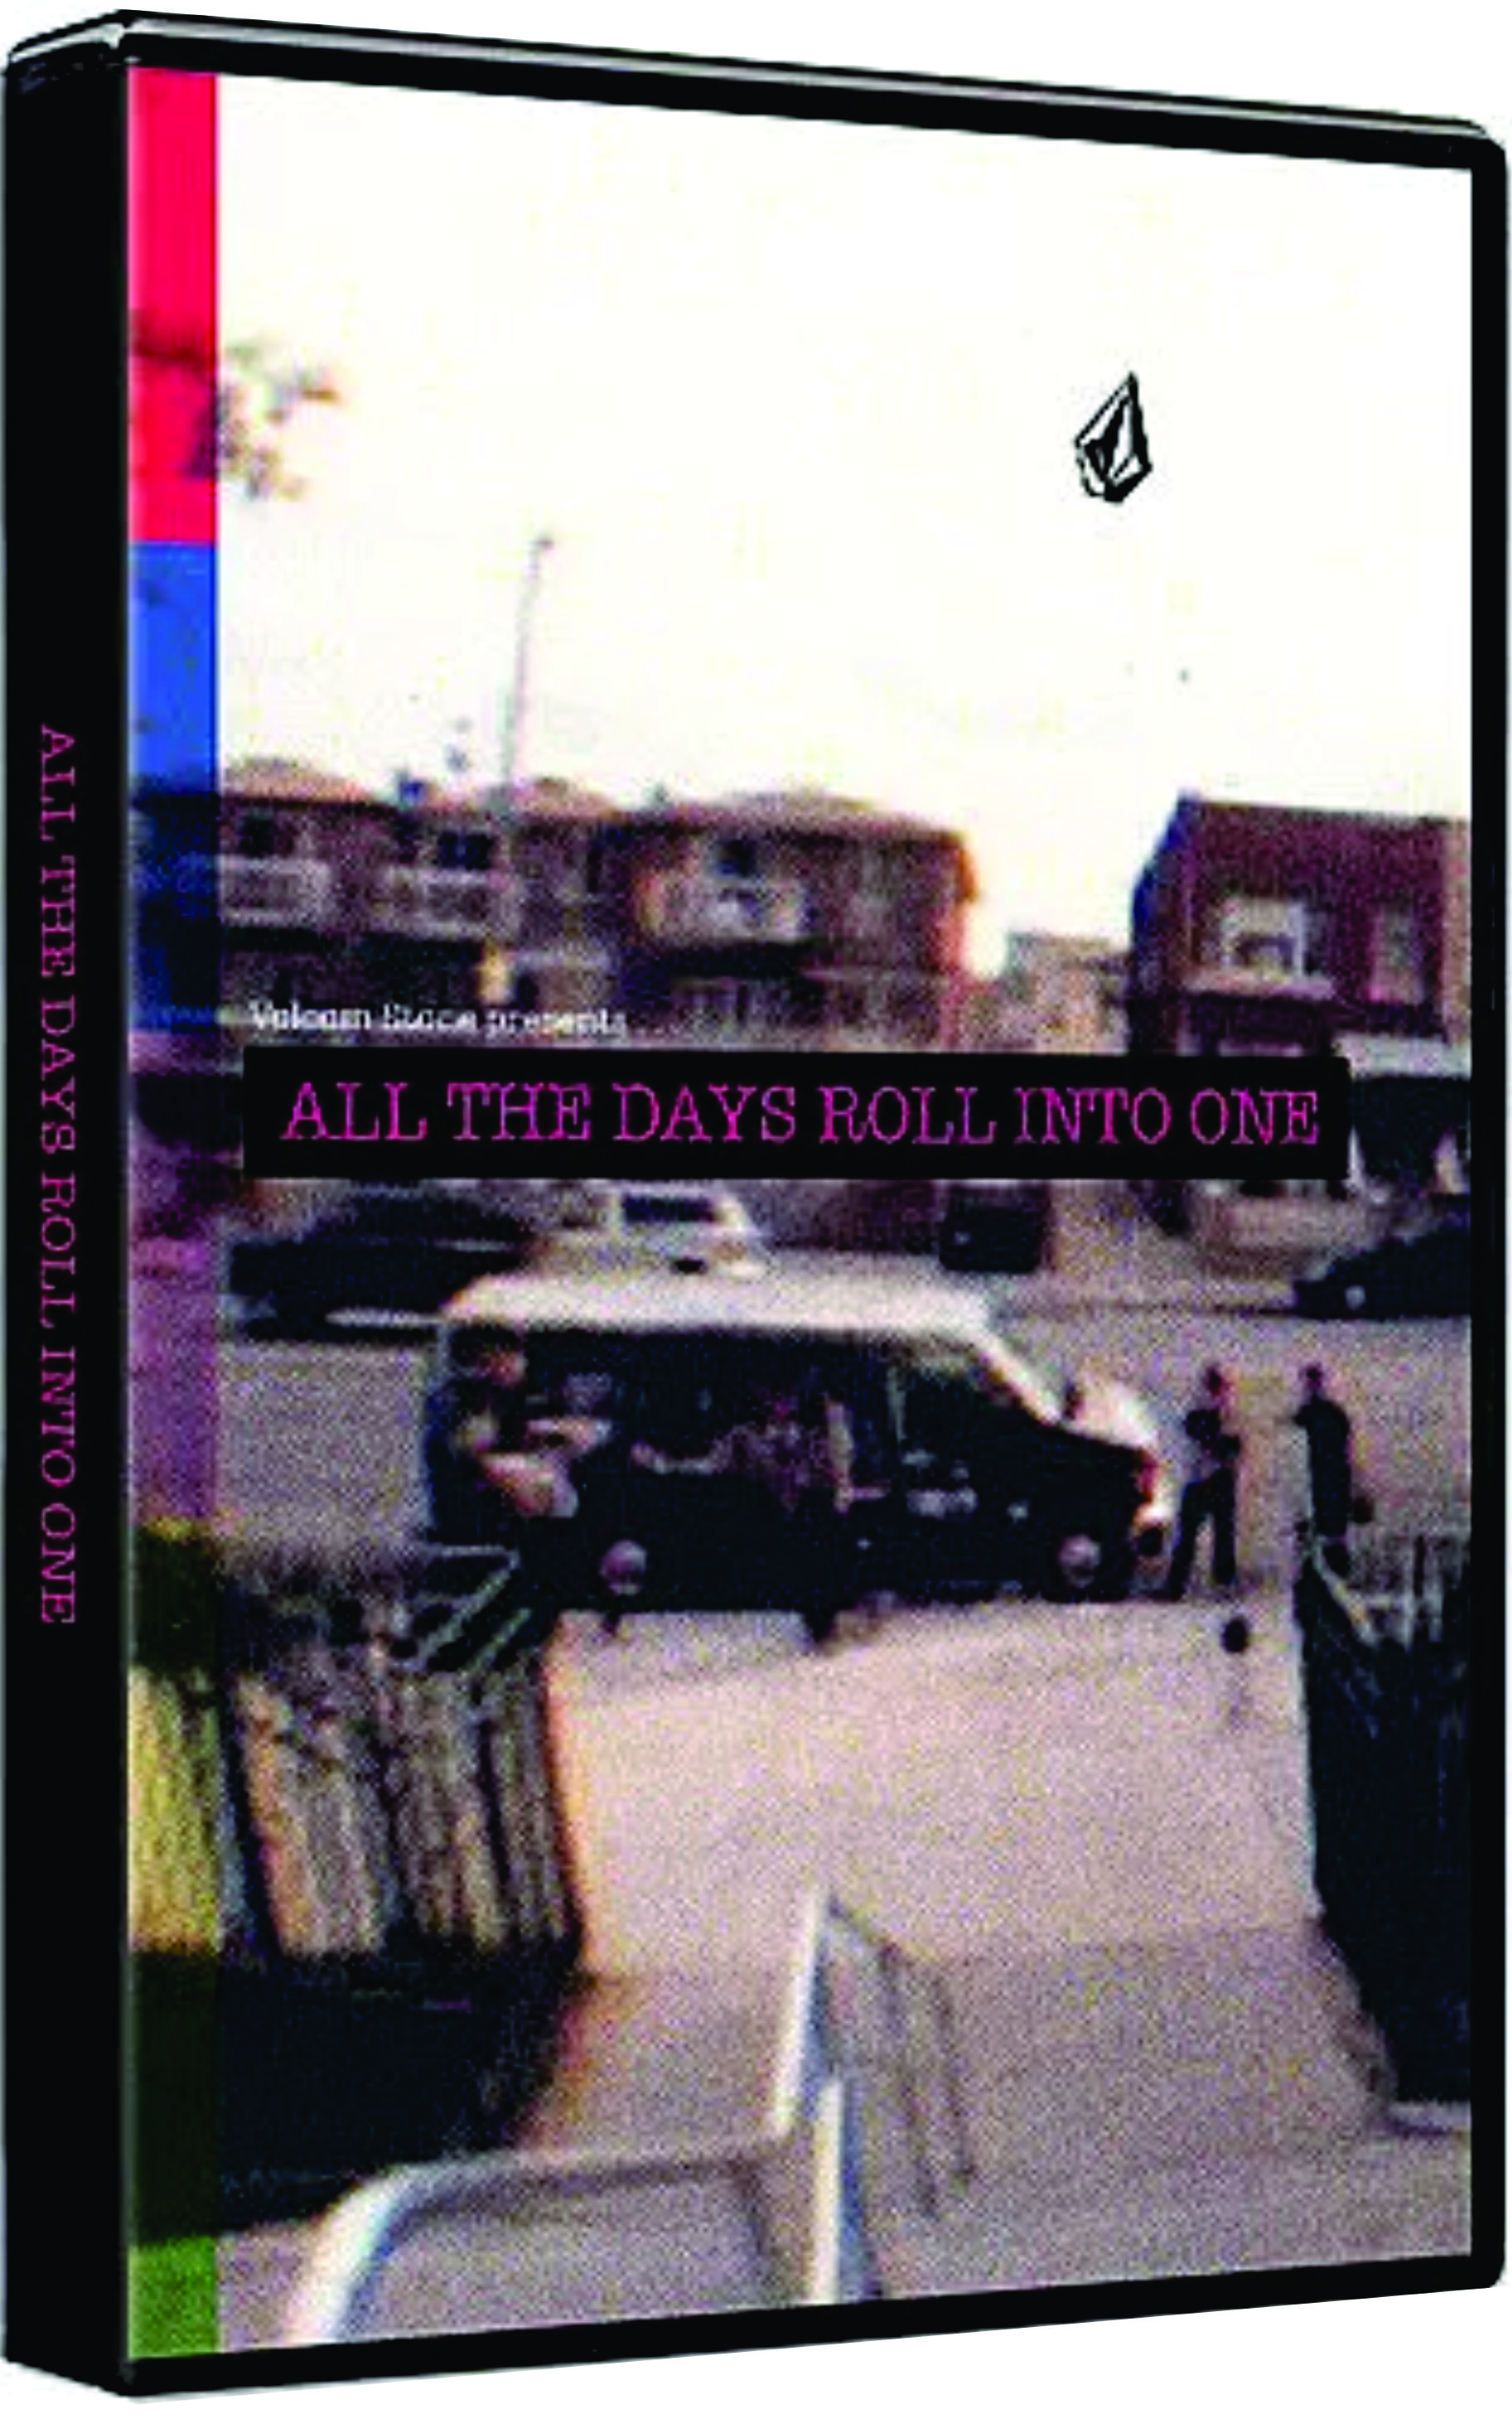 Volcom - All The Days Roll Into One cover art